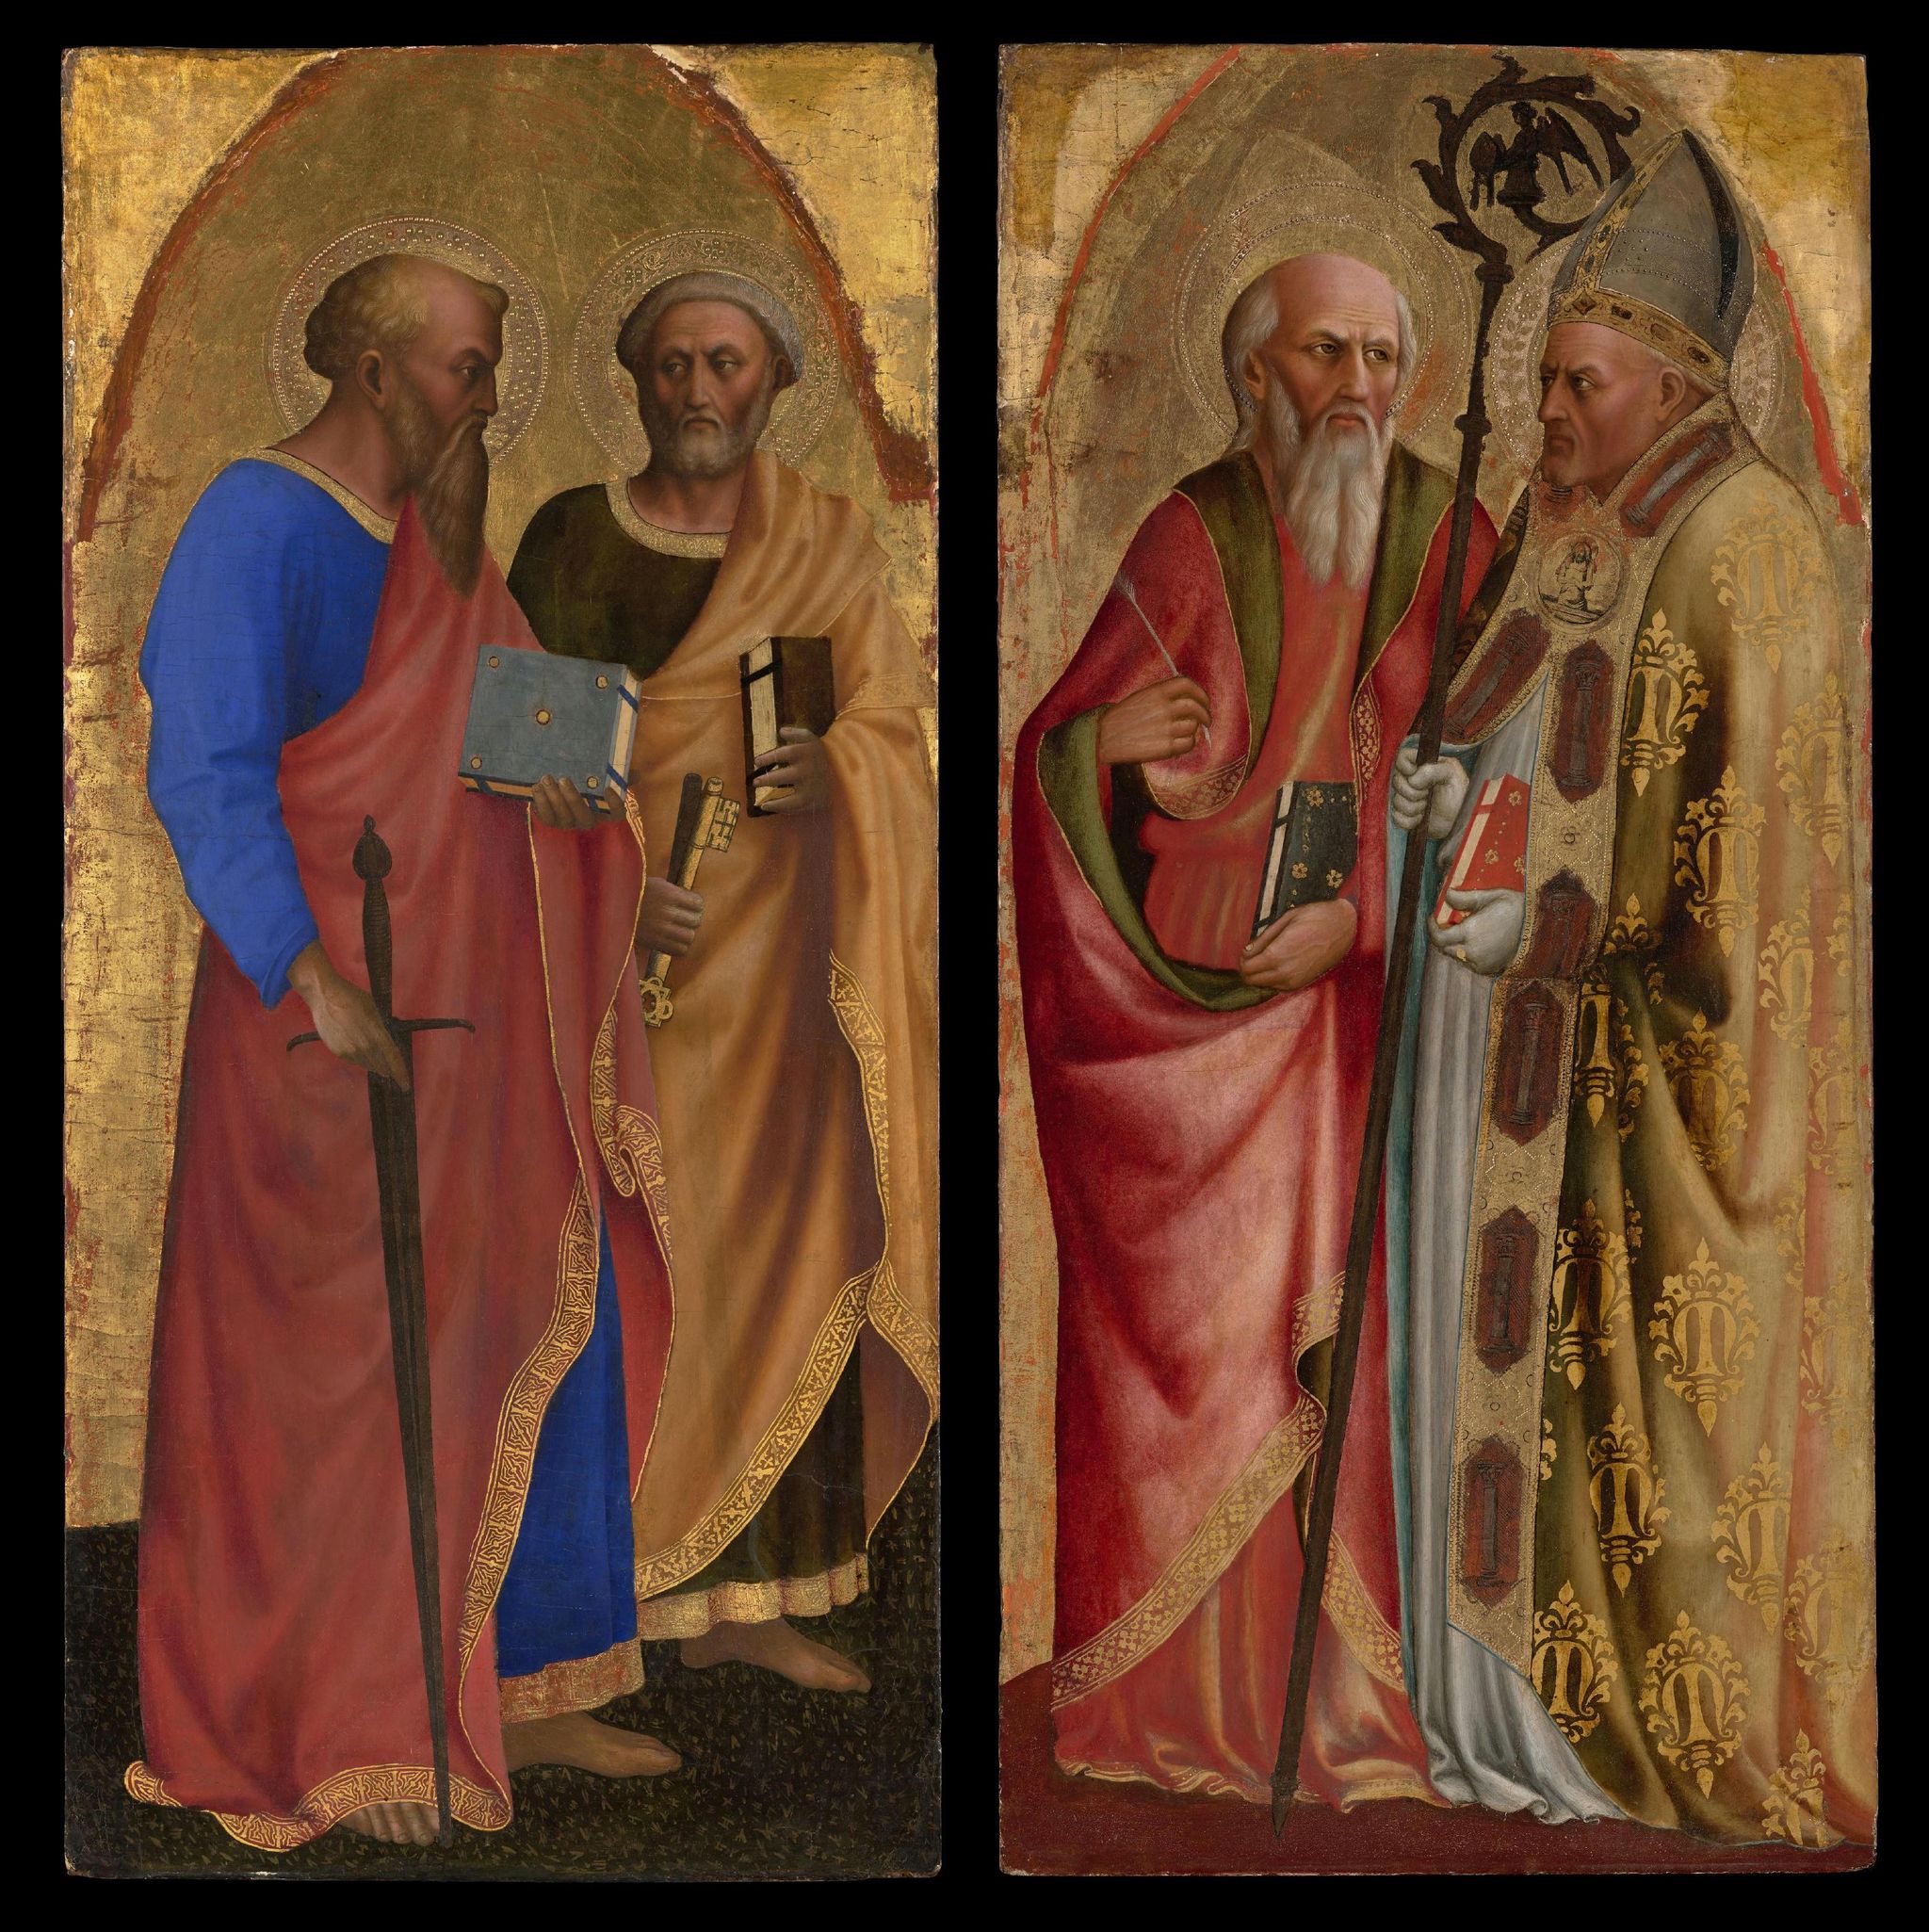 Saints Paul and Peter, and Saints John the Evangelist and Martin of Tours